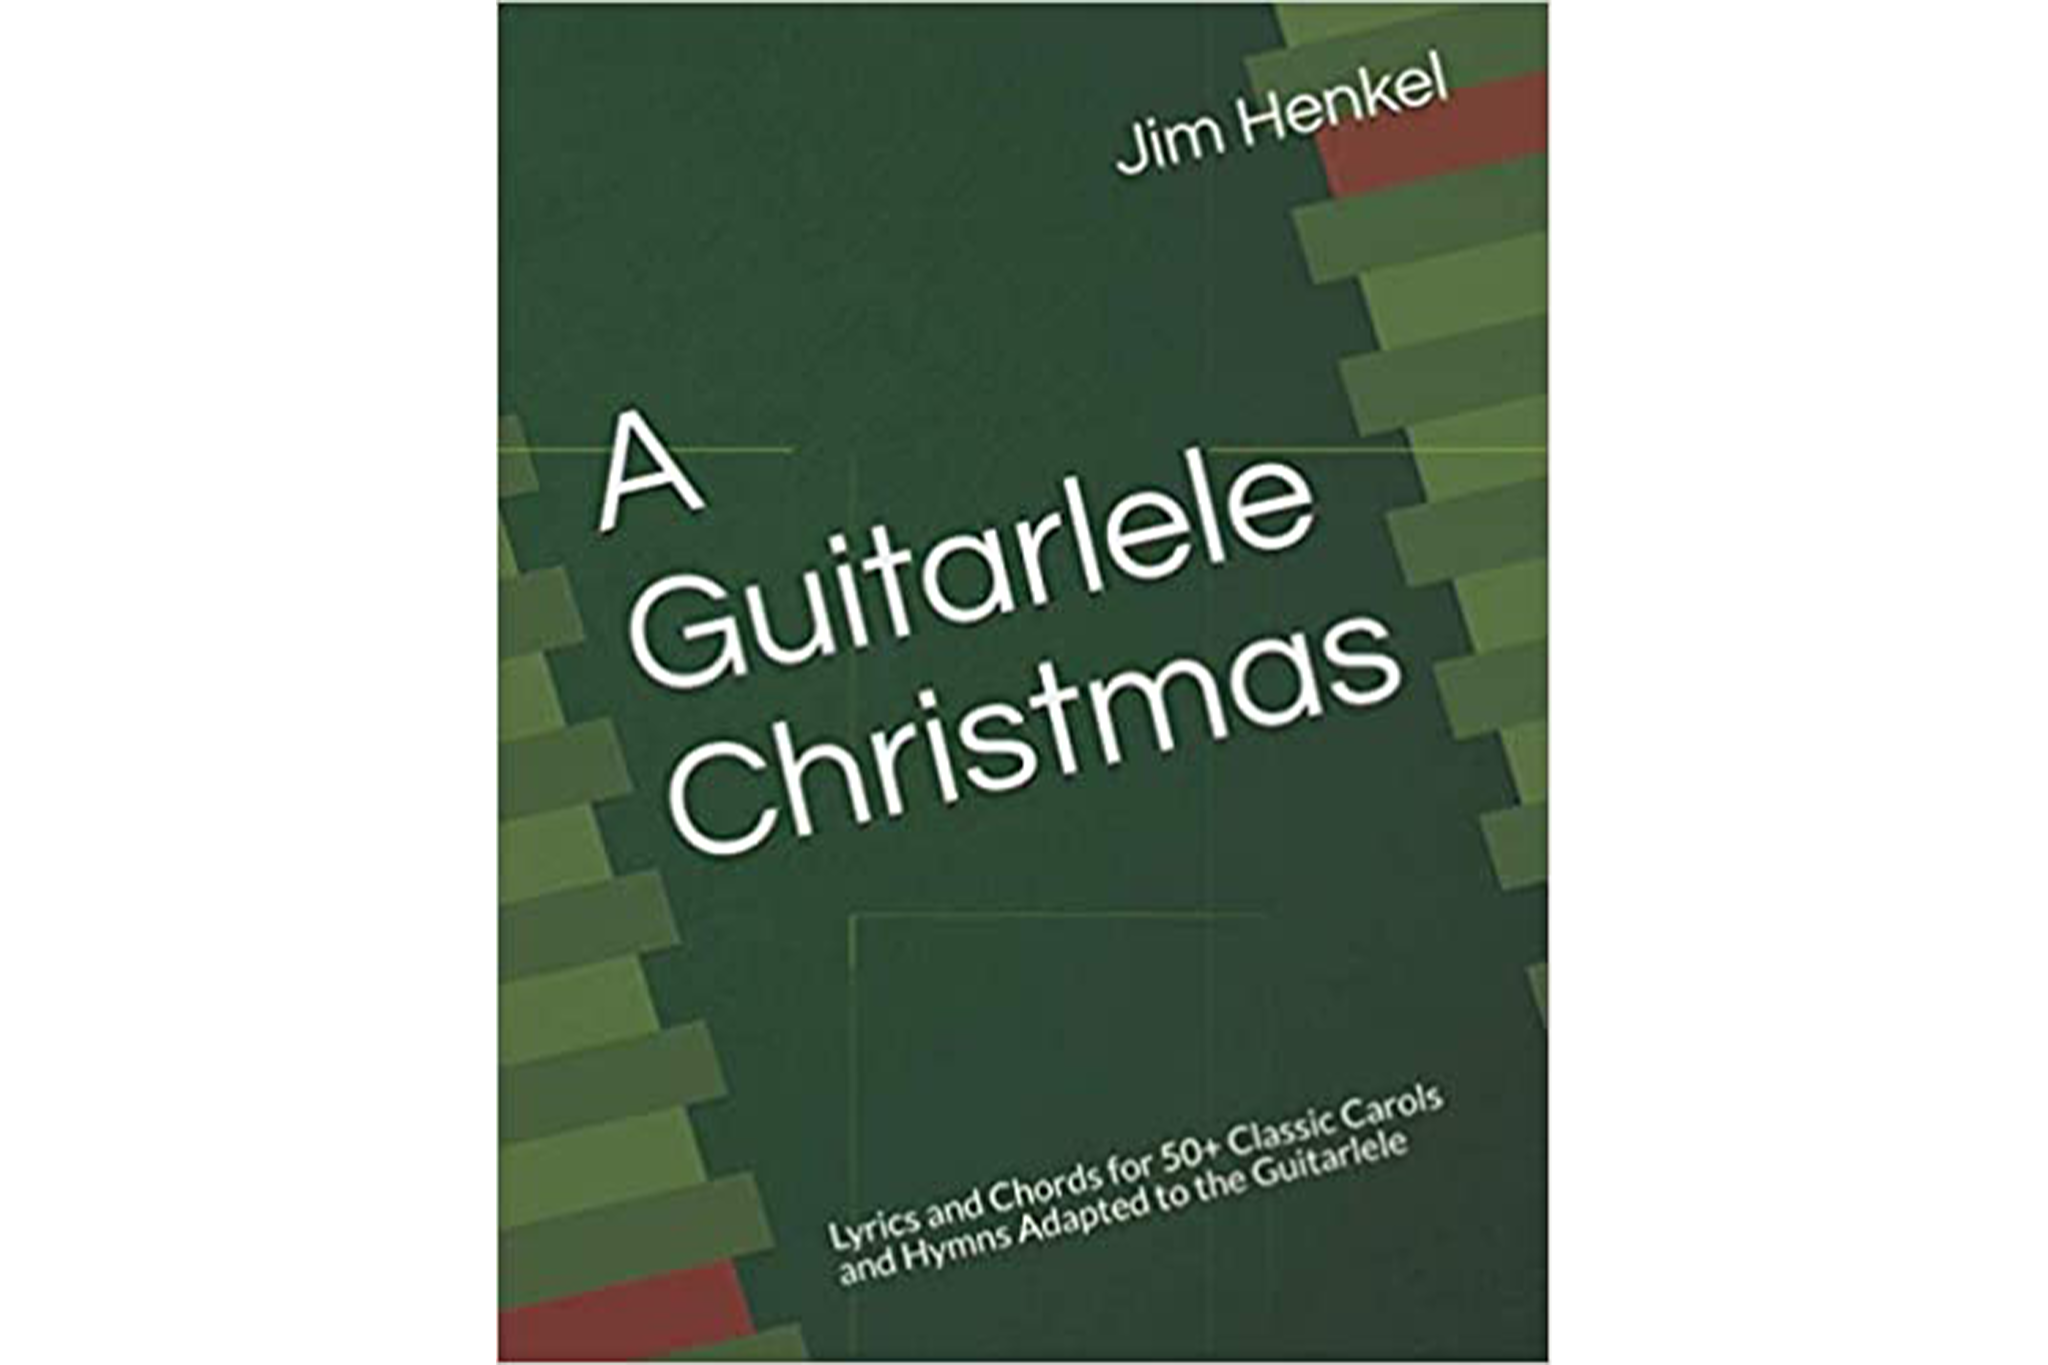 A Guitarlele Christmas: Lyrics and Chords for 50+ Classic Carols and Hymns